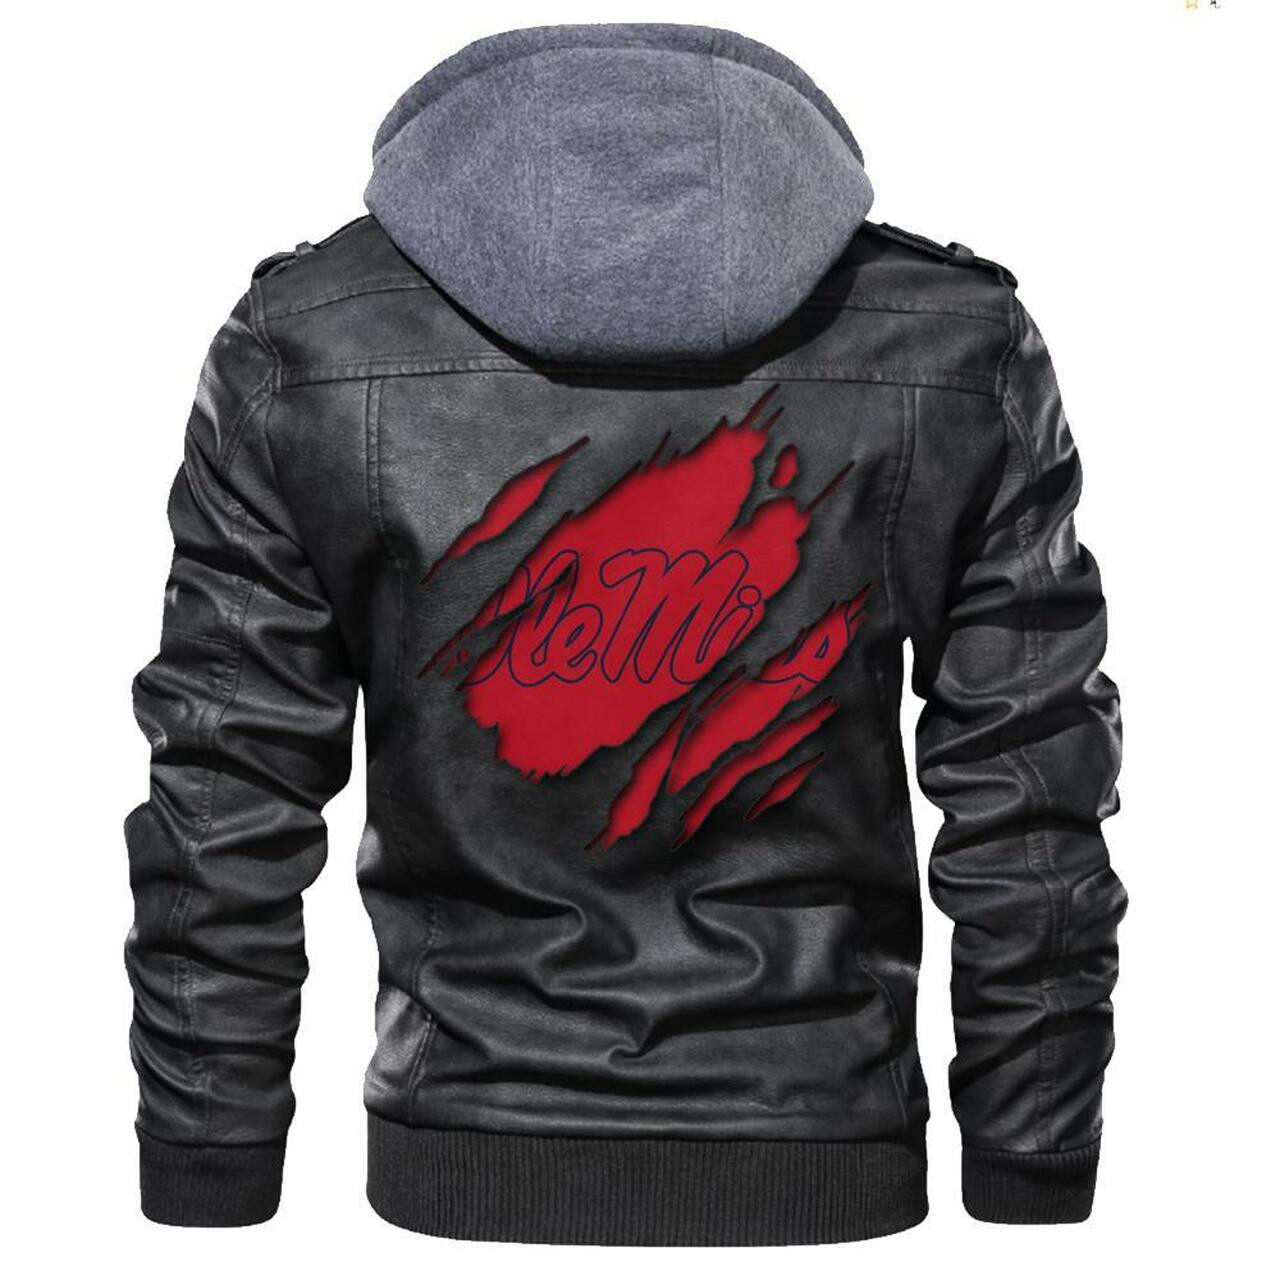 Are you looking for a great leather jacket? 156